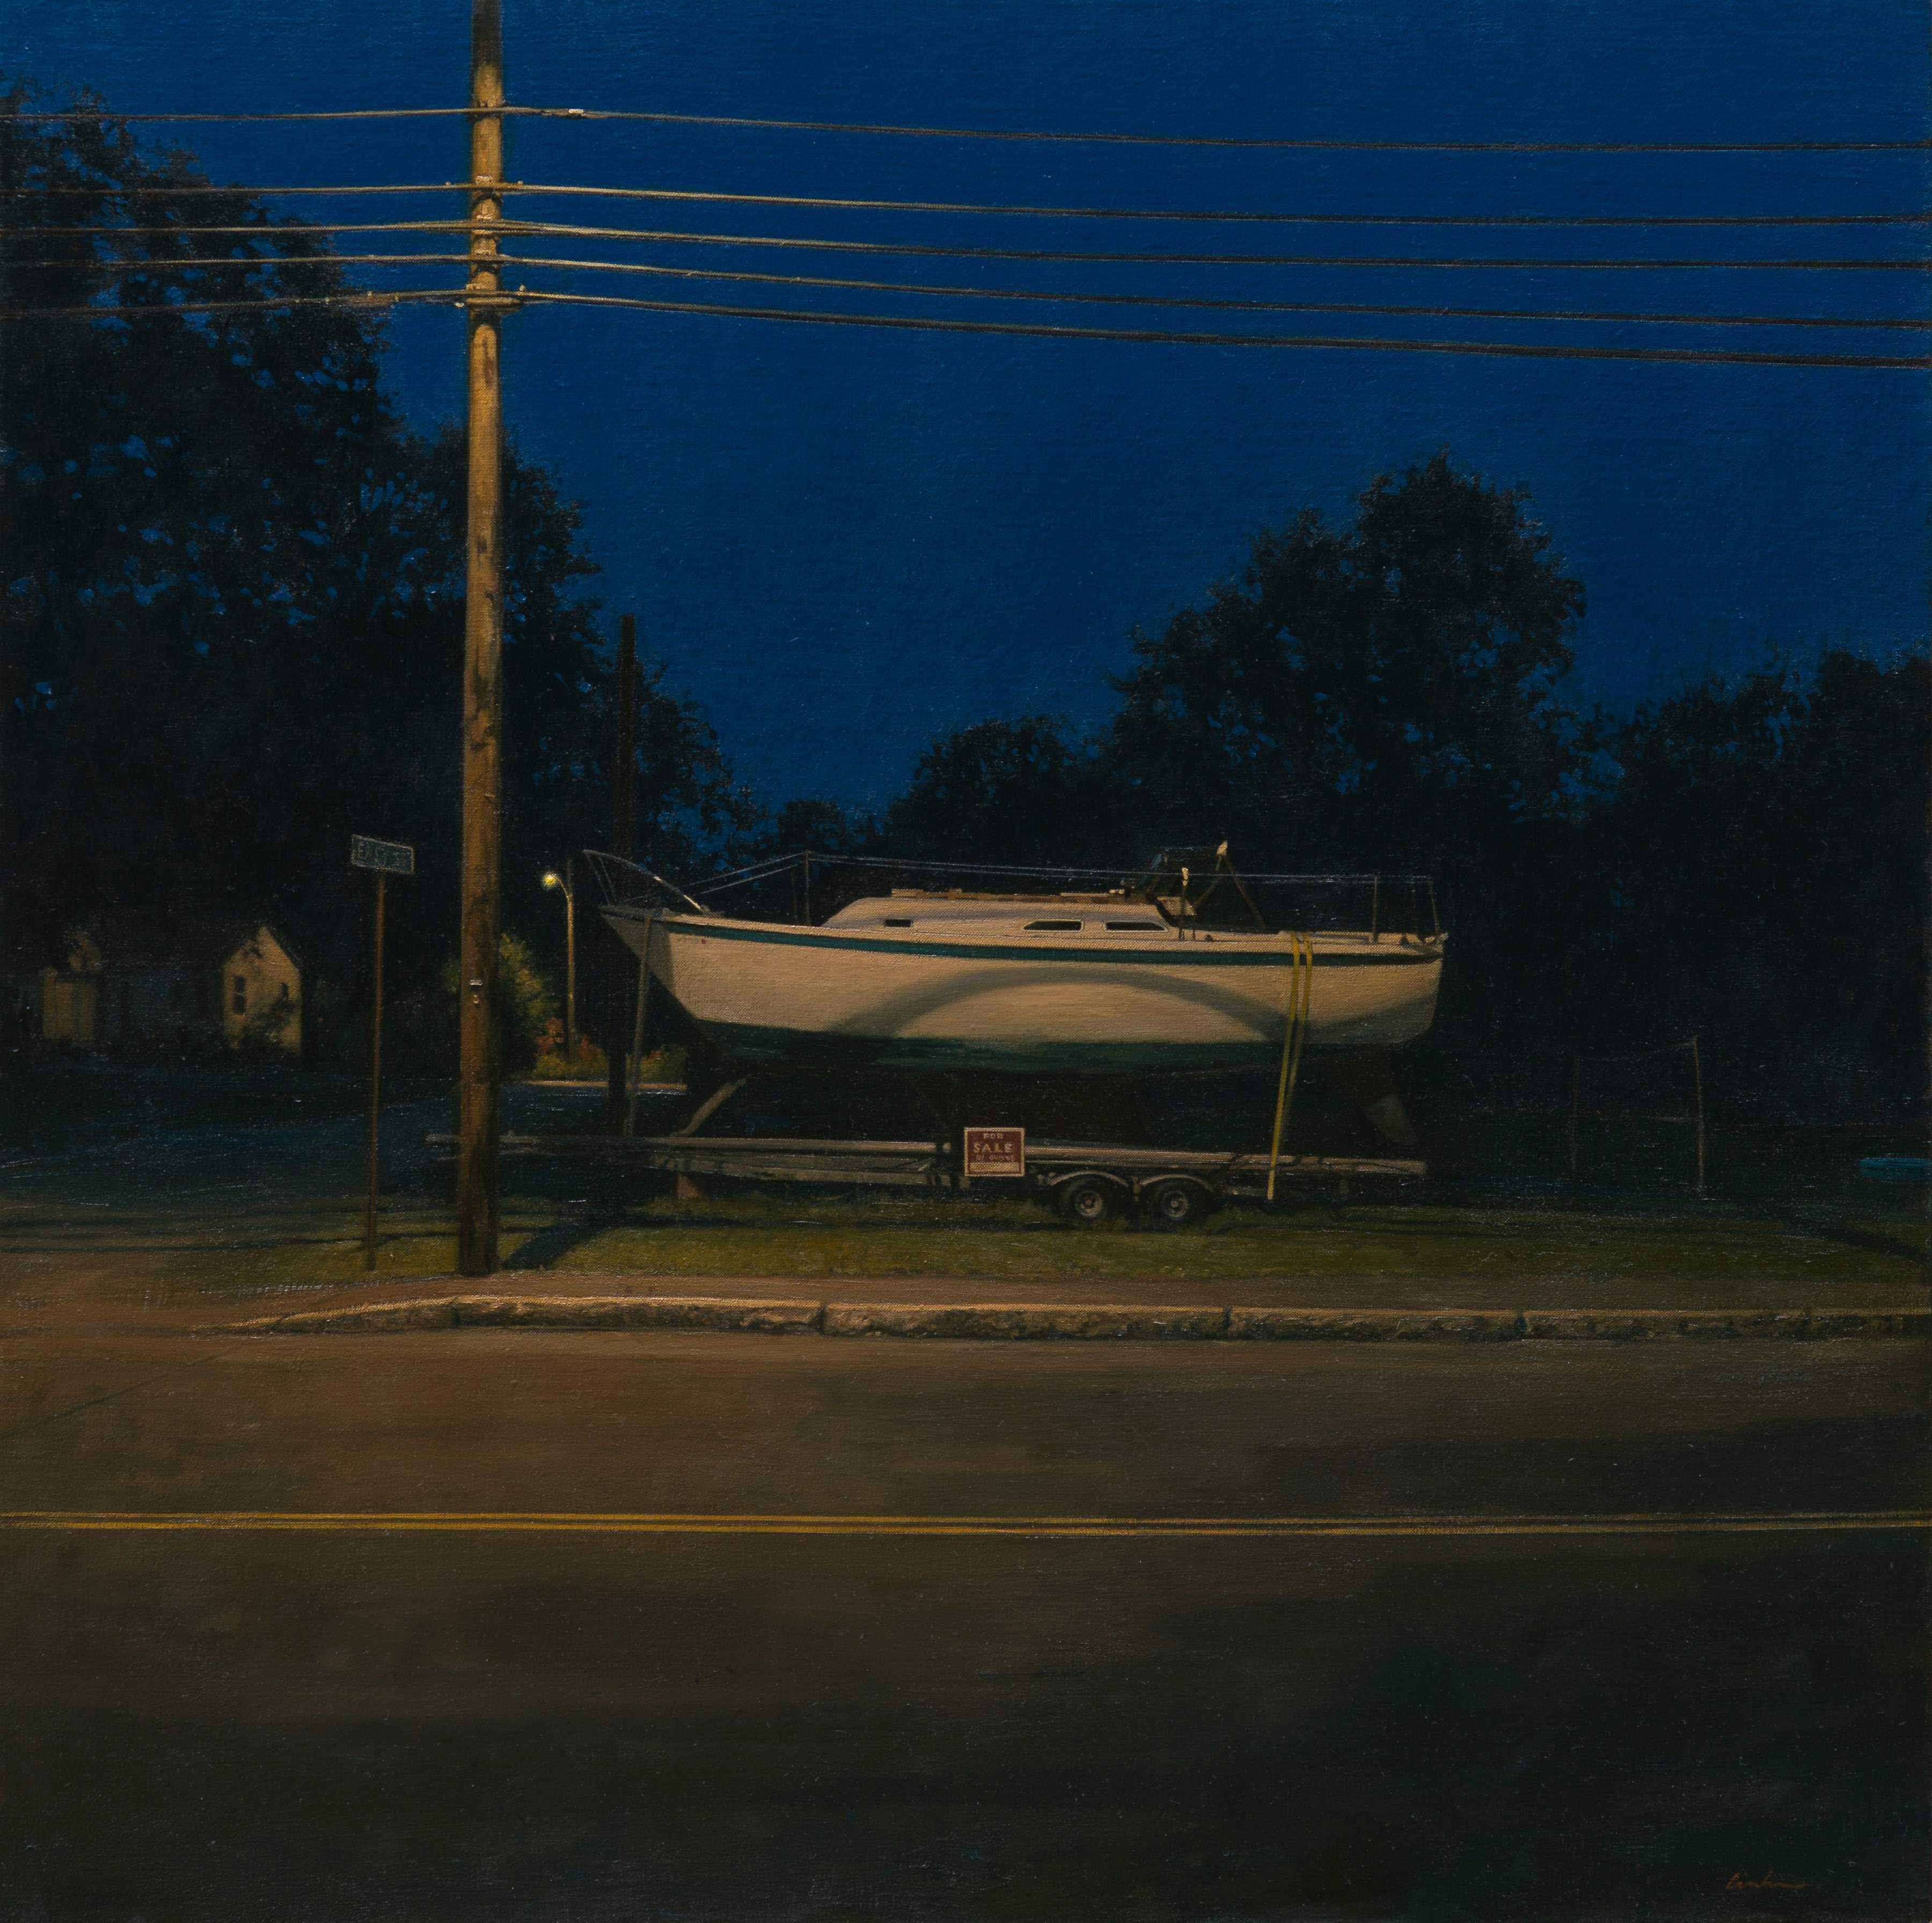 linden frederick, For Sale By Owner (SOLD), 2014, oil on linen, 34 x 34 inches